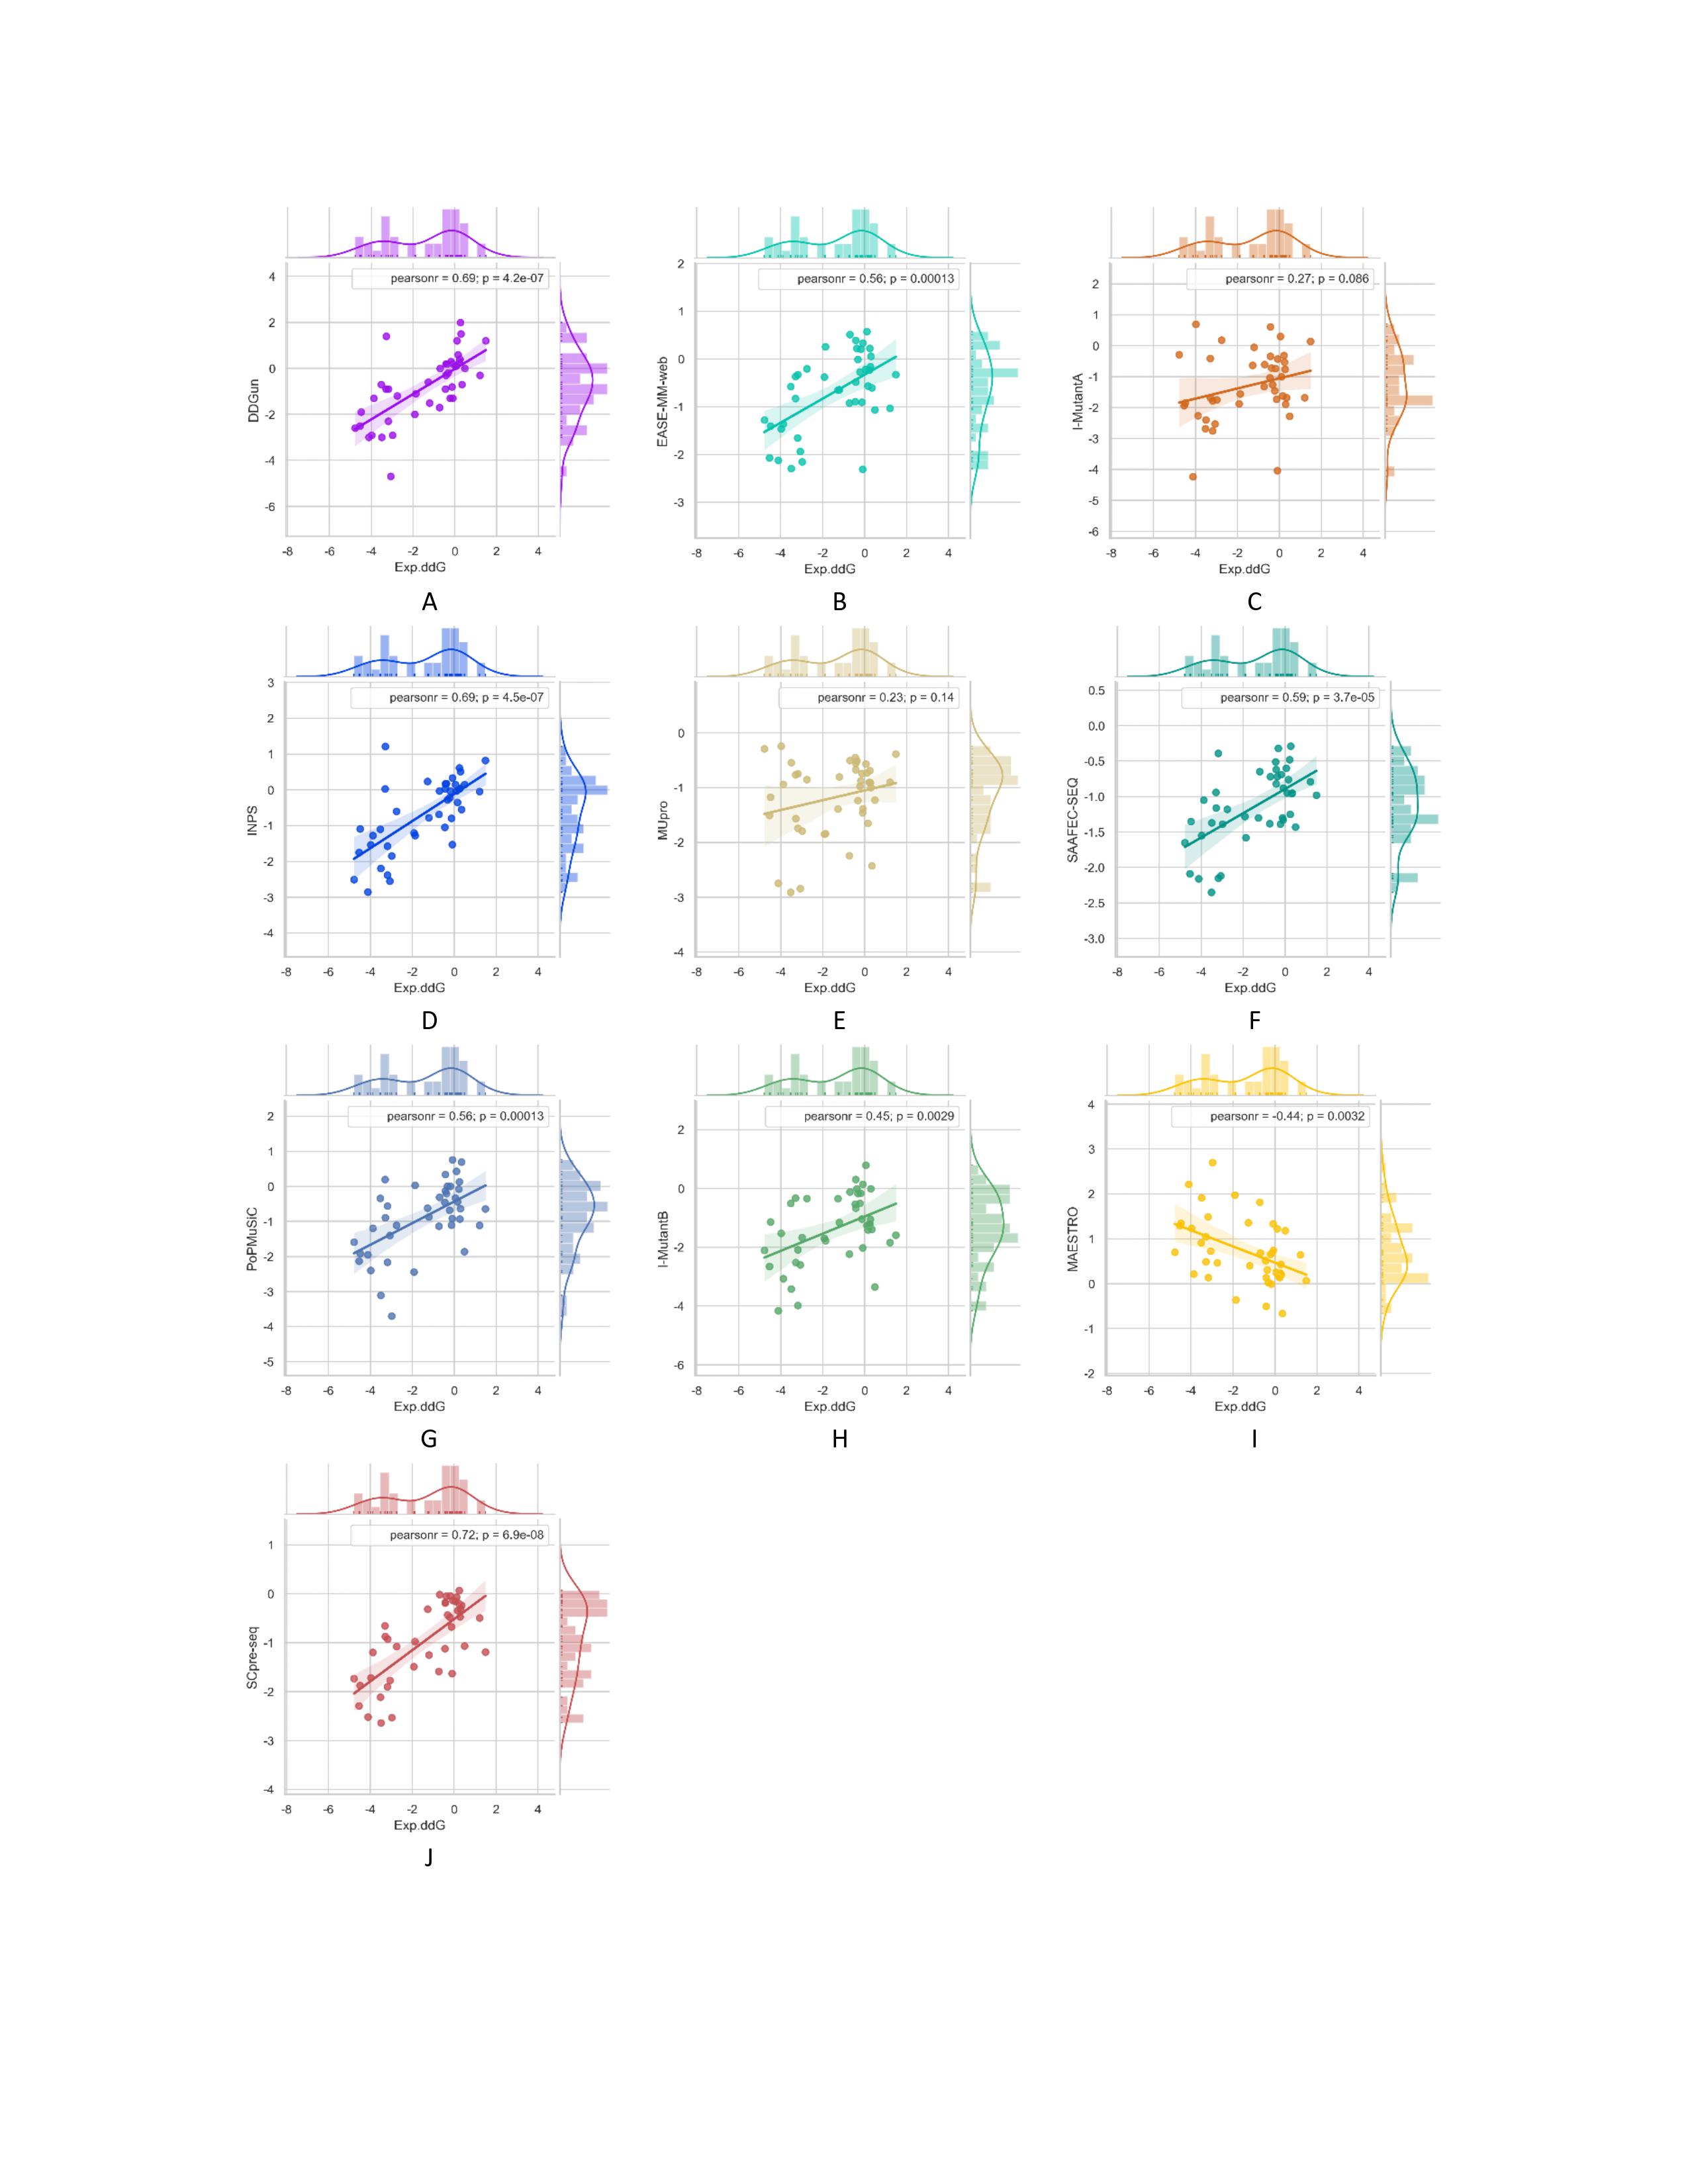 https://raw.githubusercontent.com/hurraygong/SCpre-seq/master/pictures/p53bivariate_plots.png